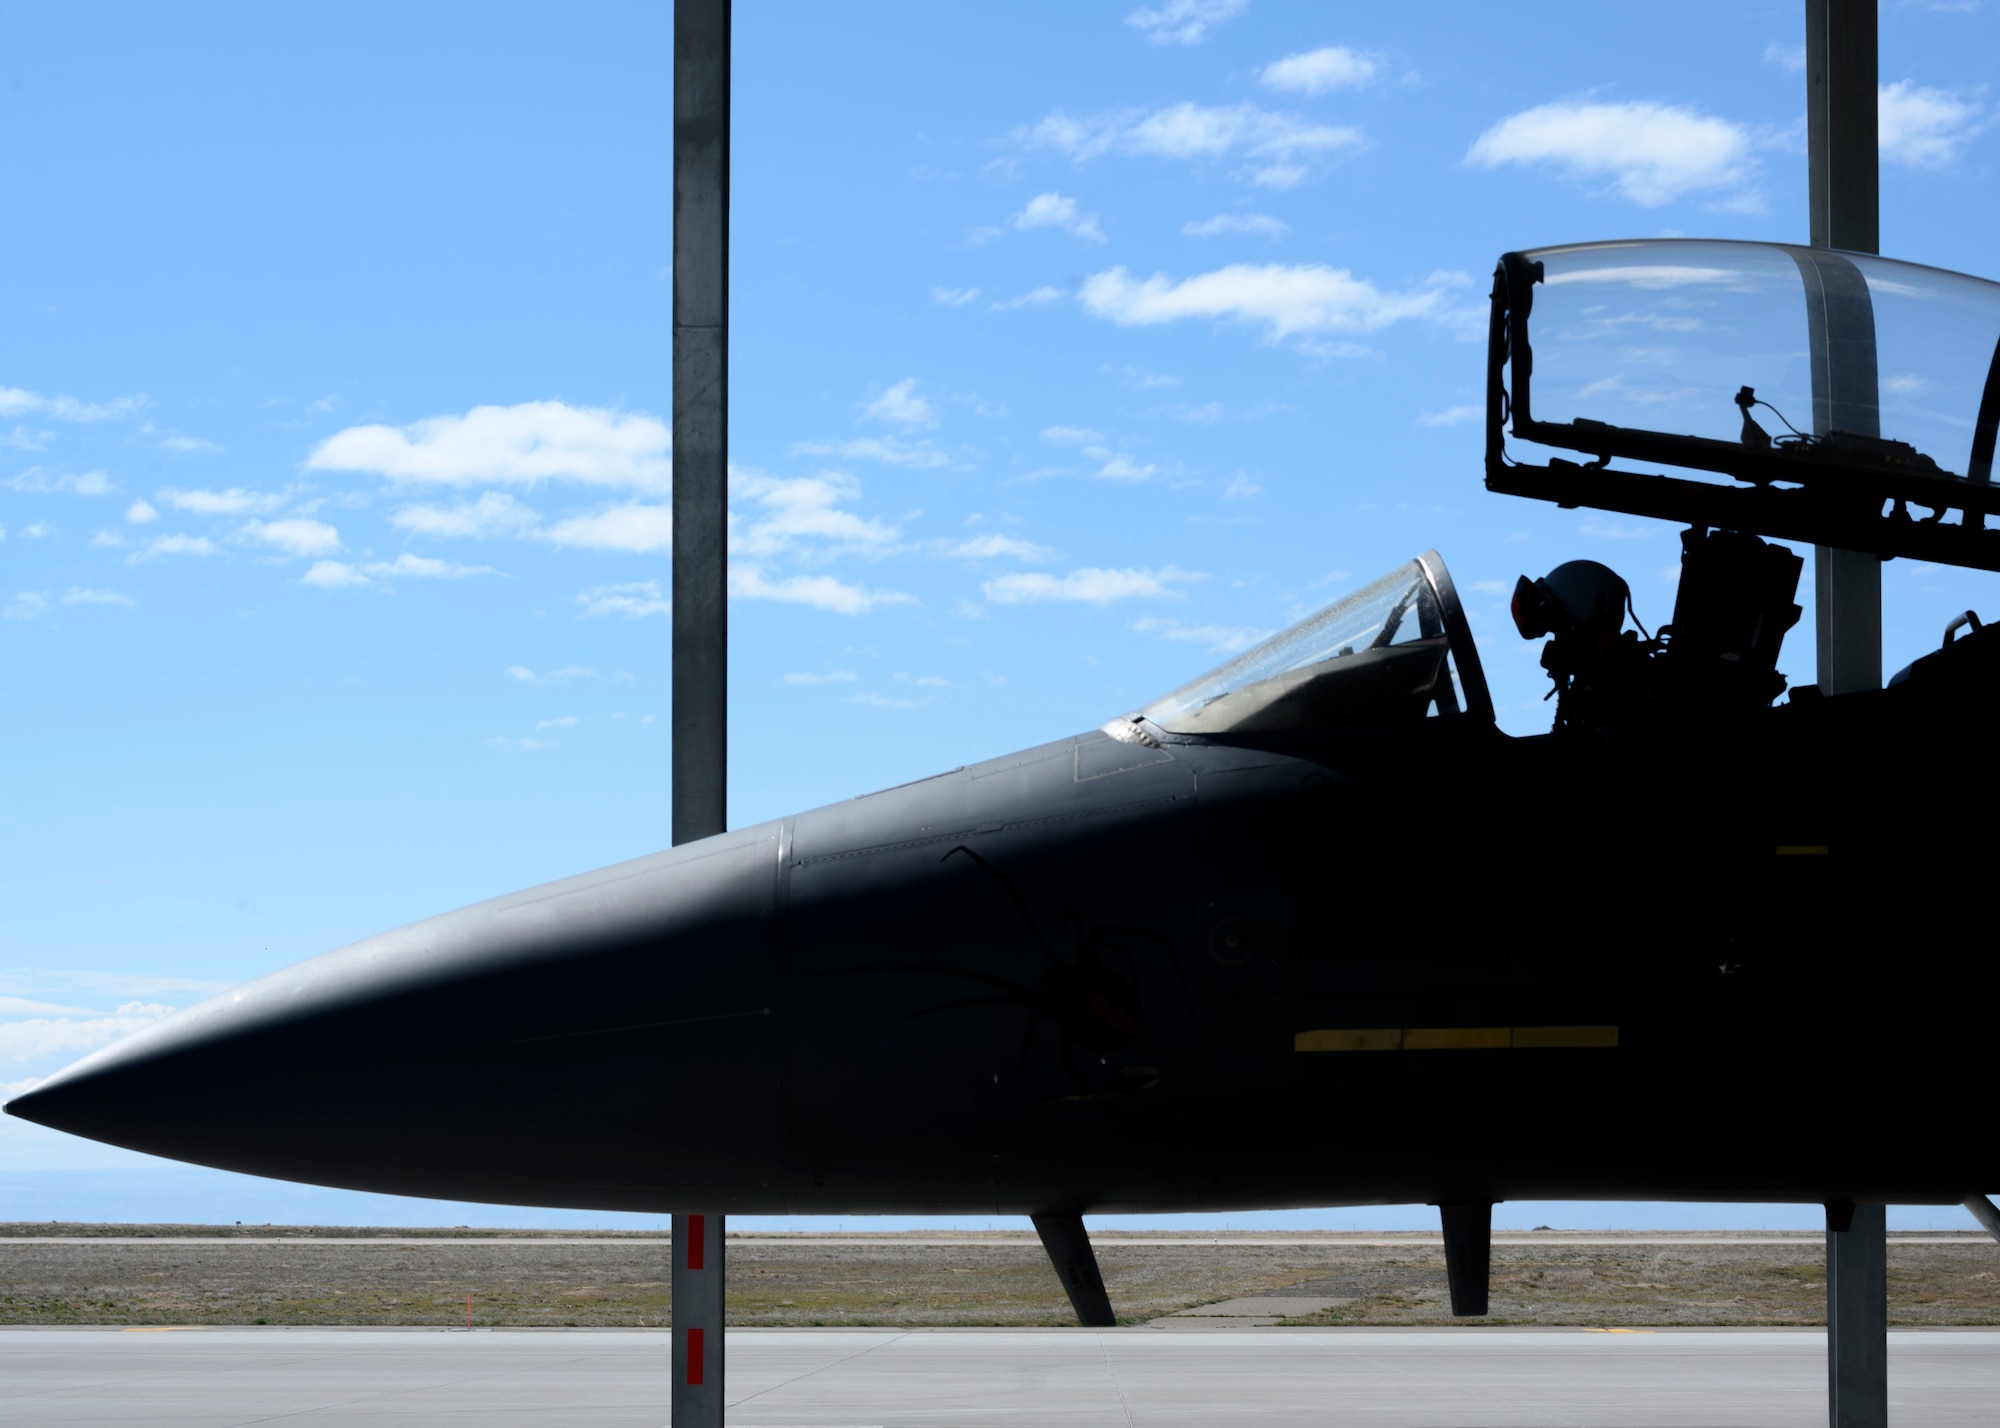 A fighter pilot from the 391st Fighter Squadron prepares to conduct flight training, March 16, 2020, at Mountain Home Air Force Base, Idaho. The Gunfighters are maintining their total force efforts in the midst of schedule changes due to COVID-19. (U.S. Air Force photo by Senior Airman Tyrell Hall)